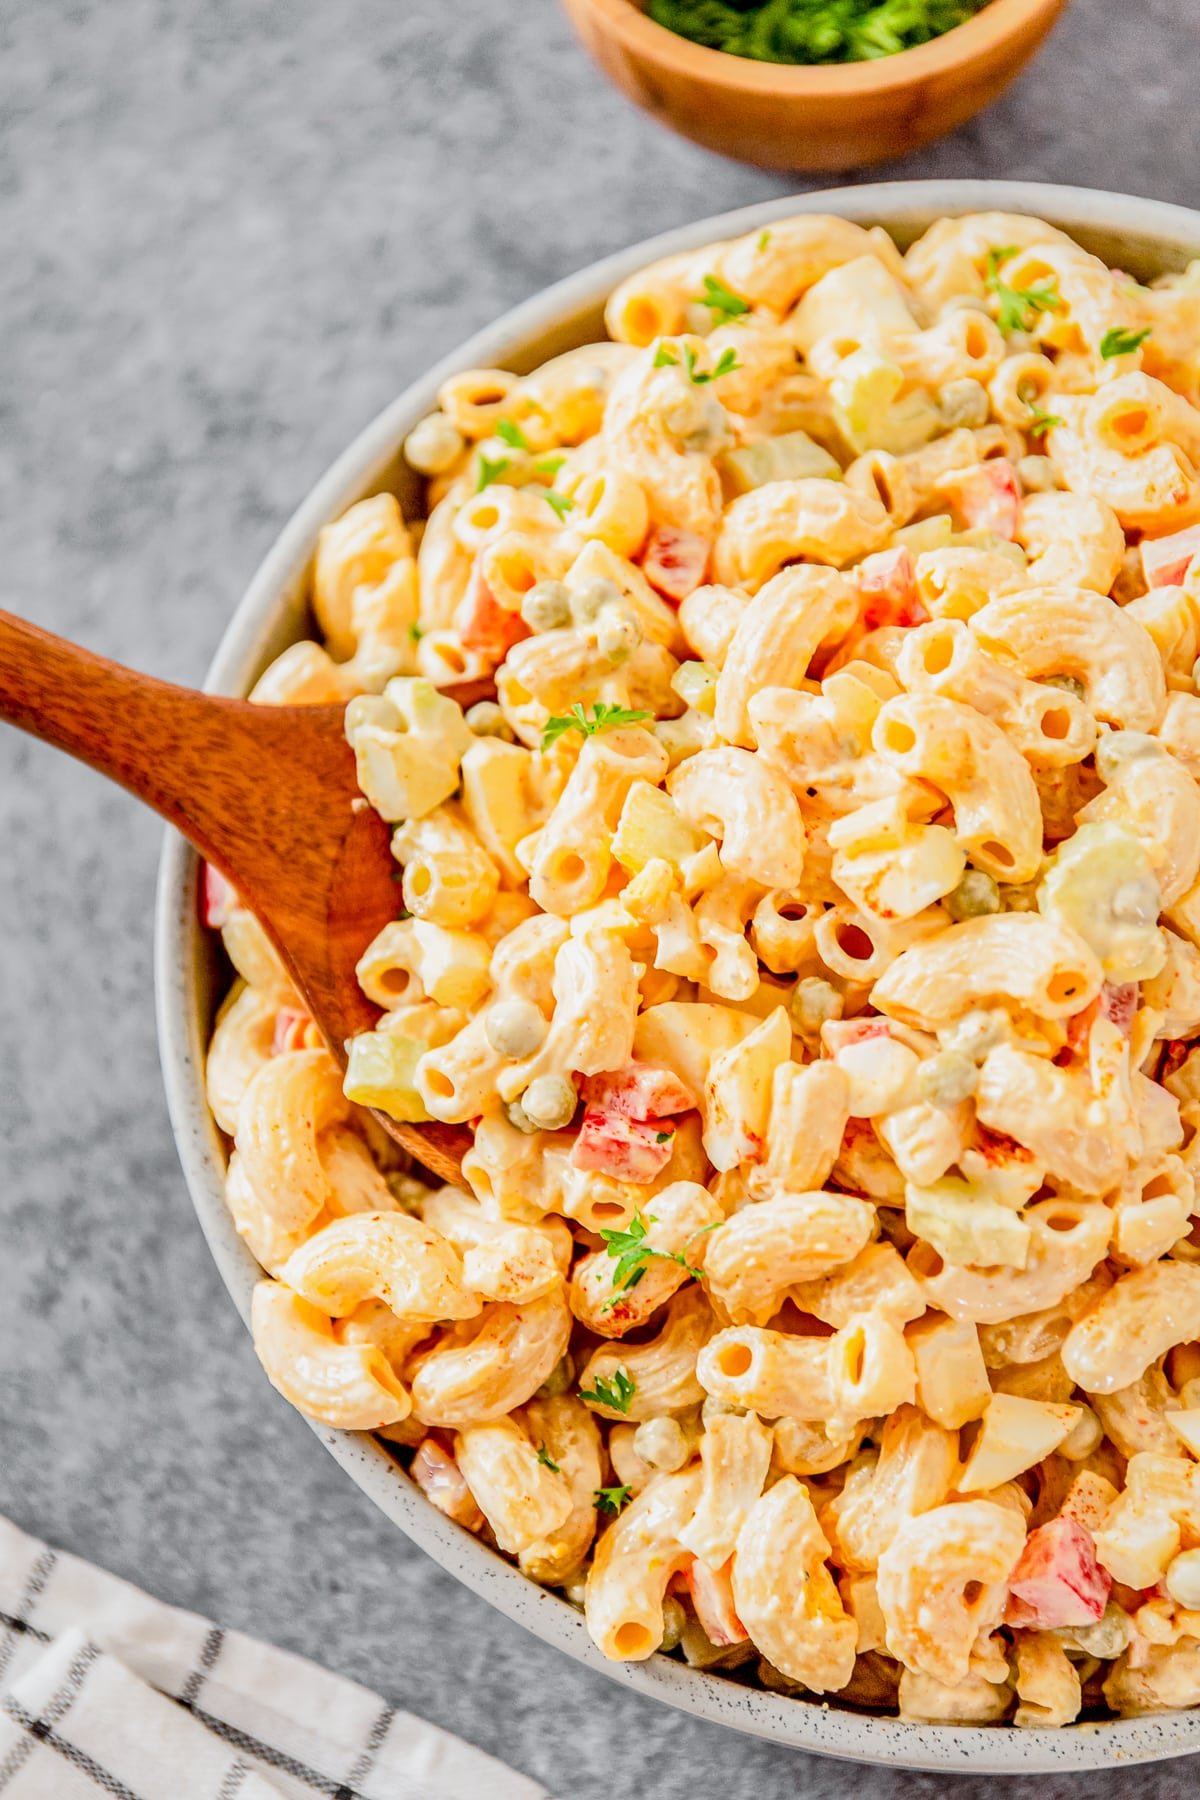 Overhead image of macaroni salad with peas with a serving spoon